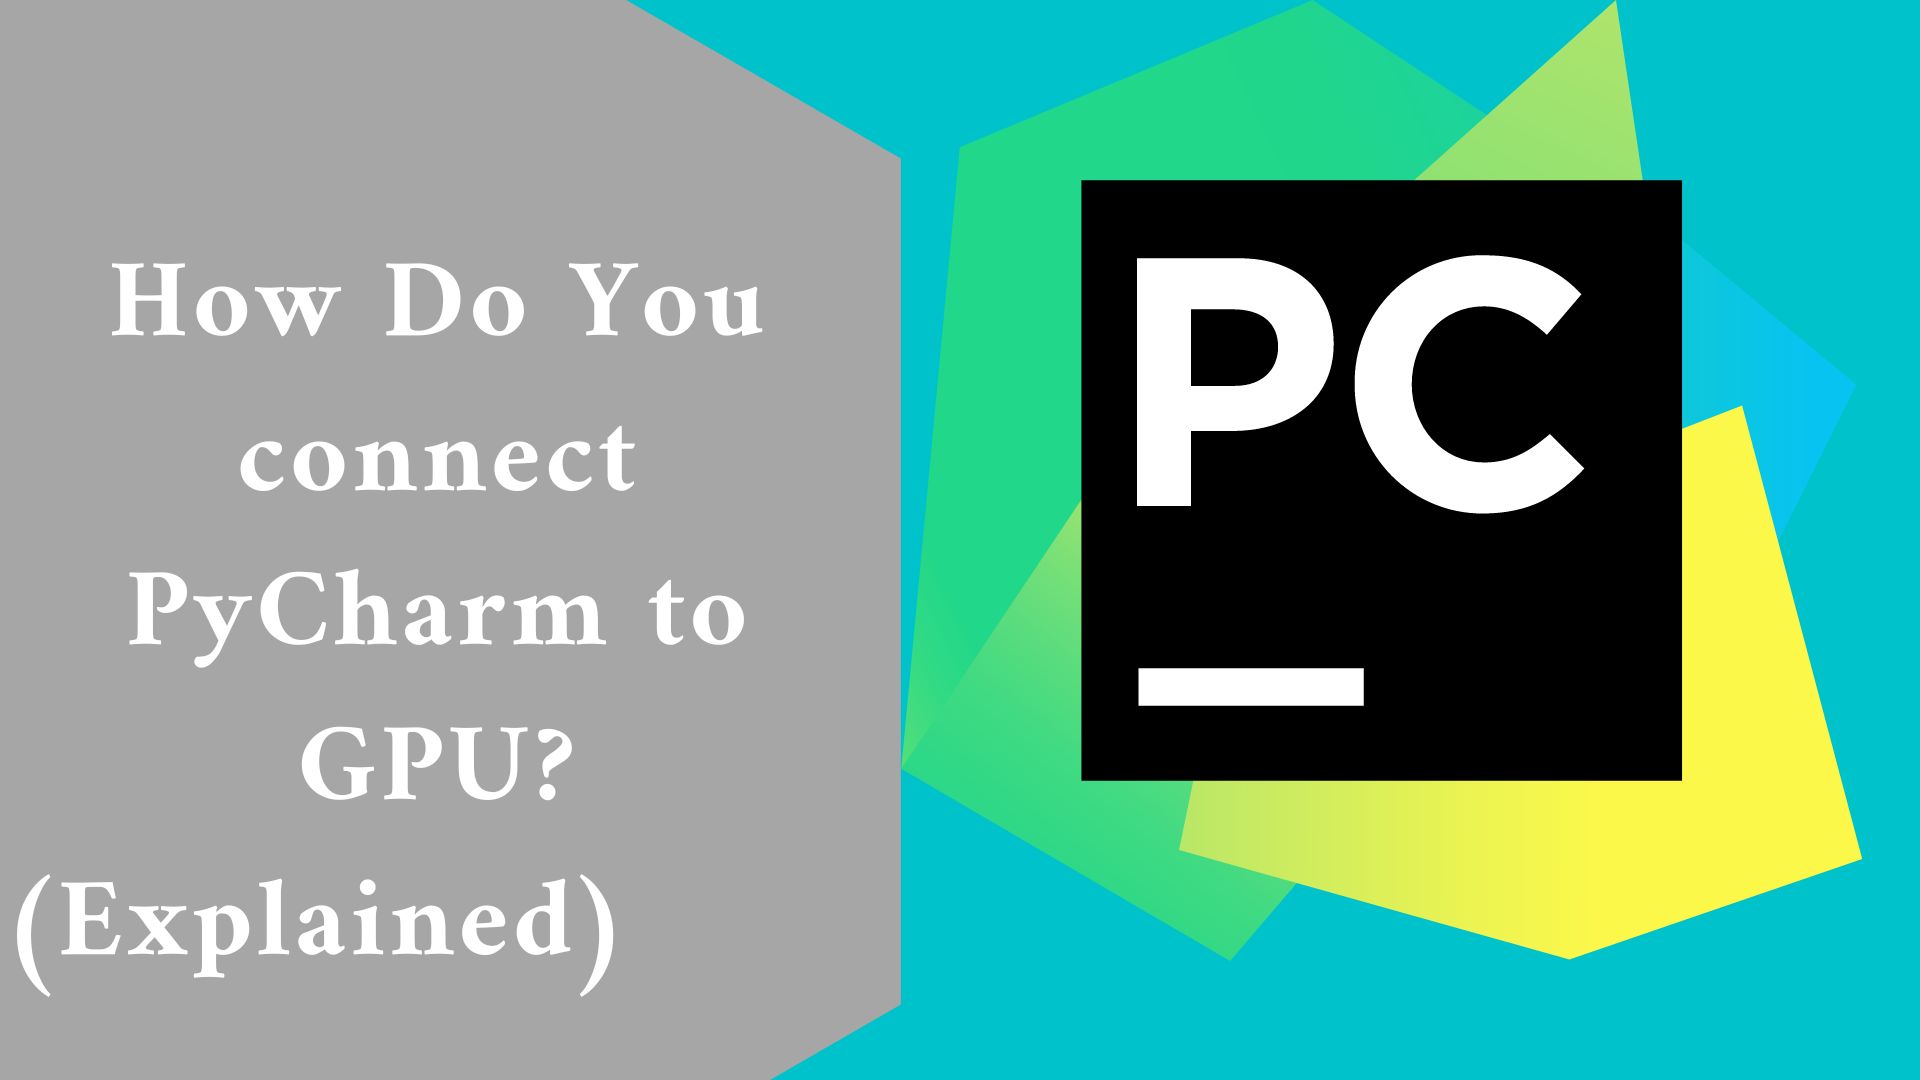 How Do You connect PyCharm to GPU? (Explained)